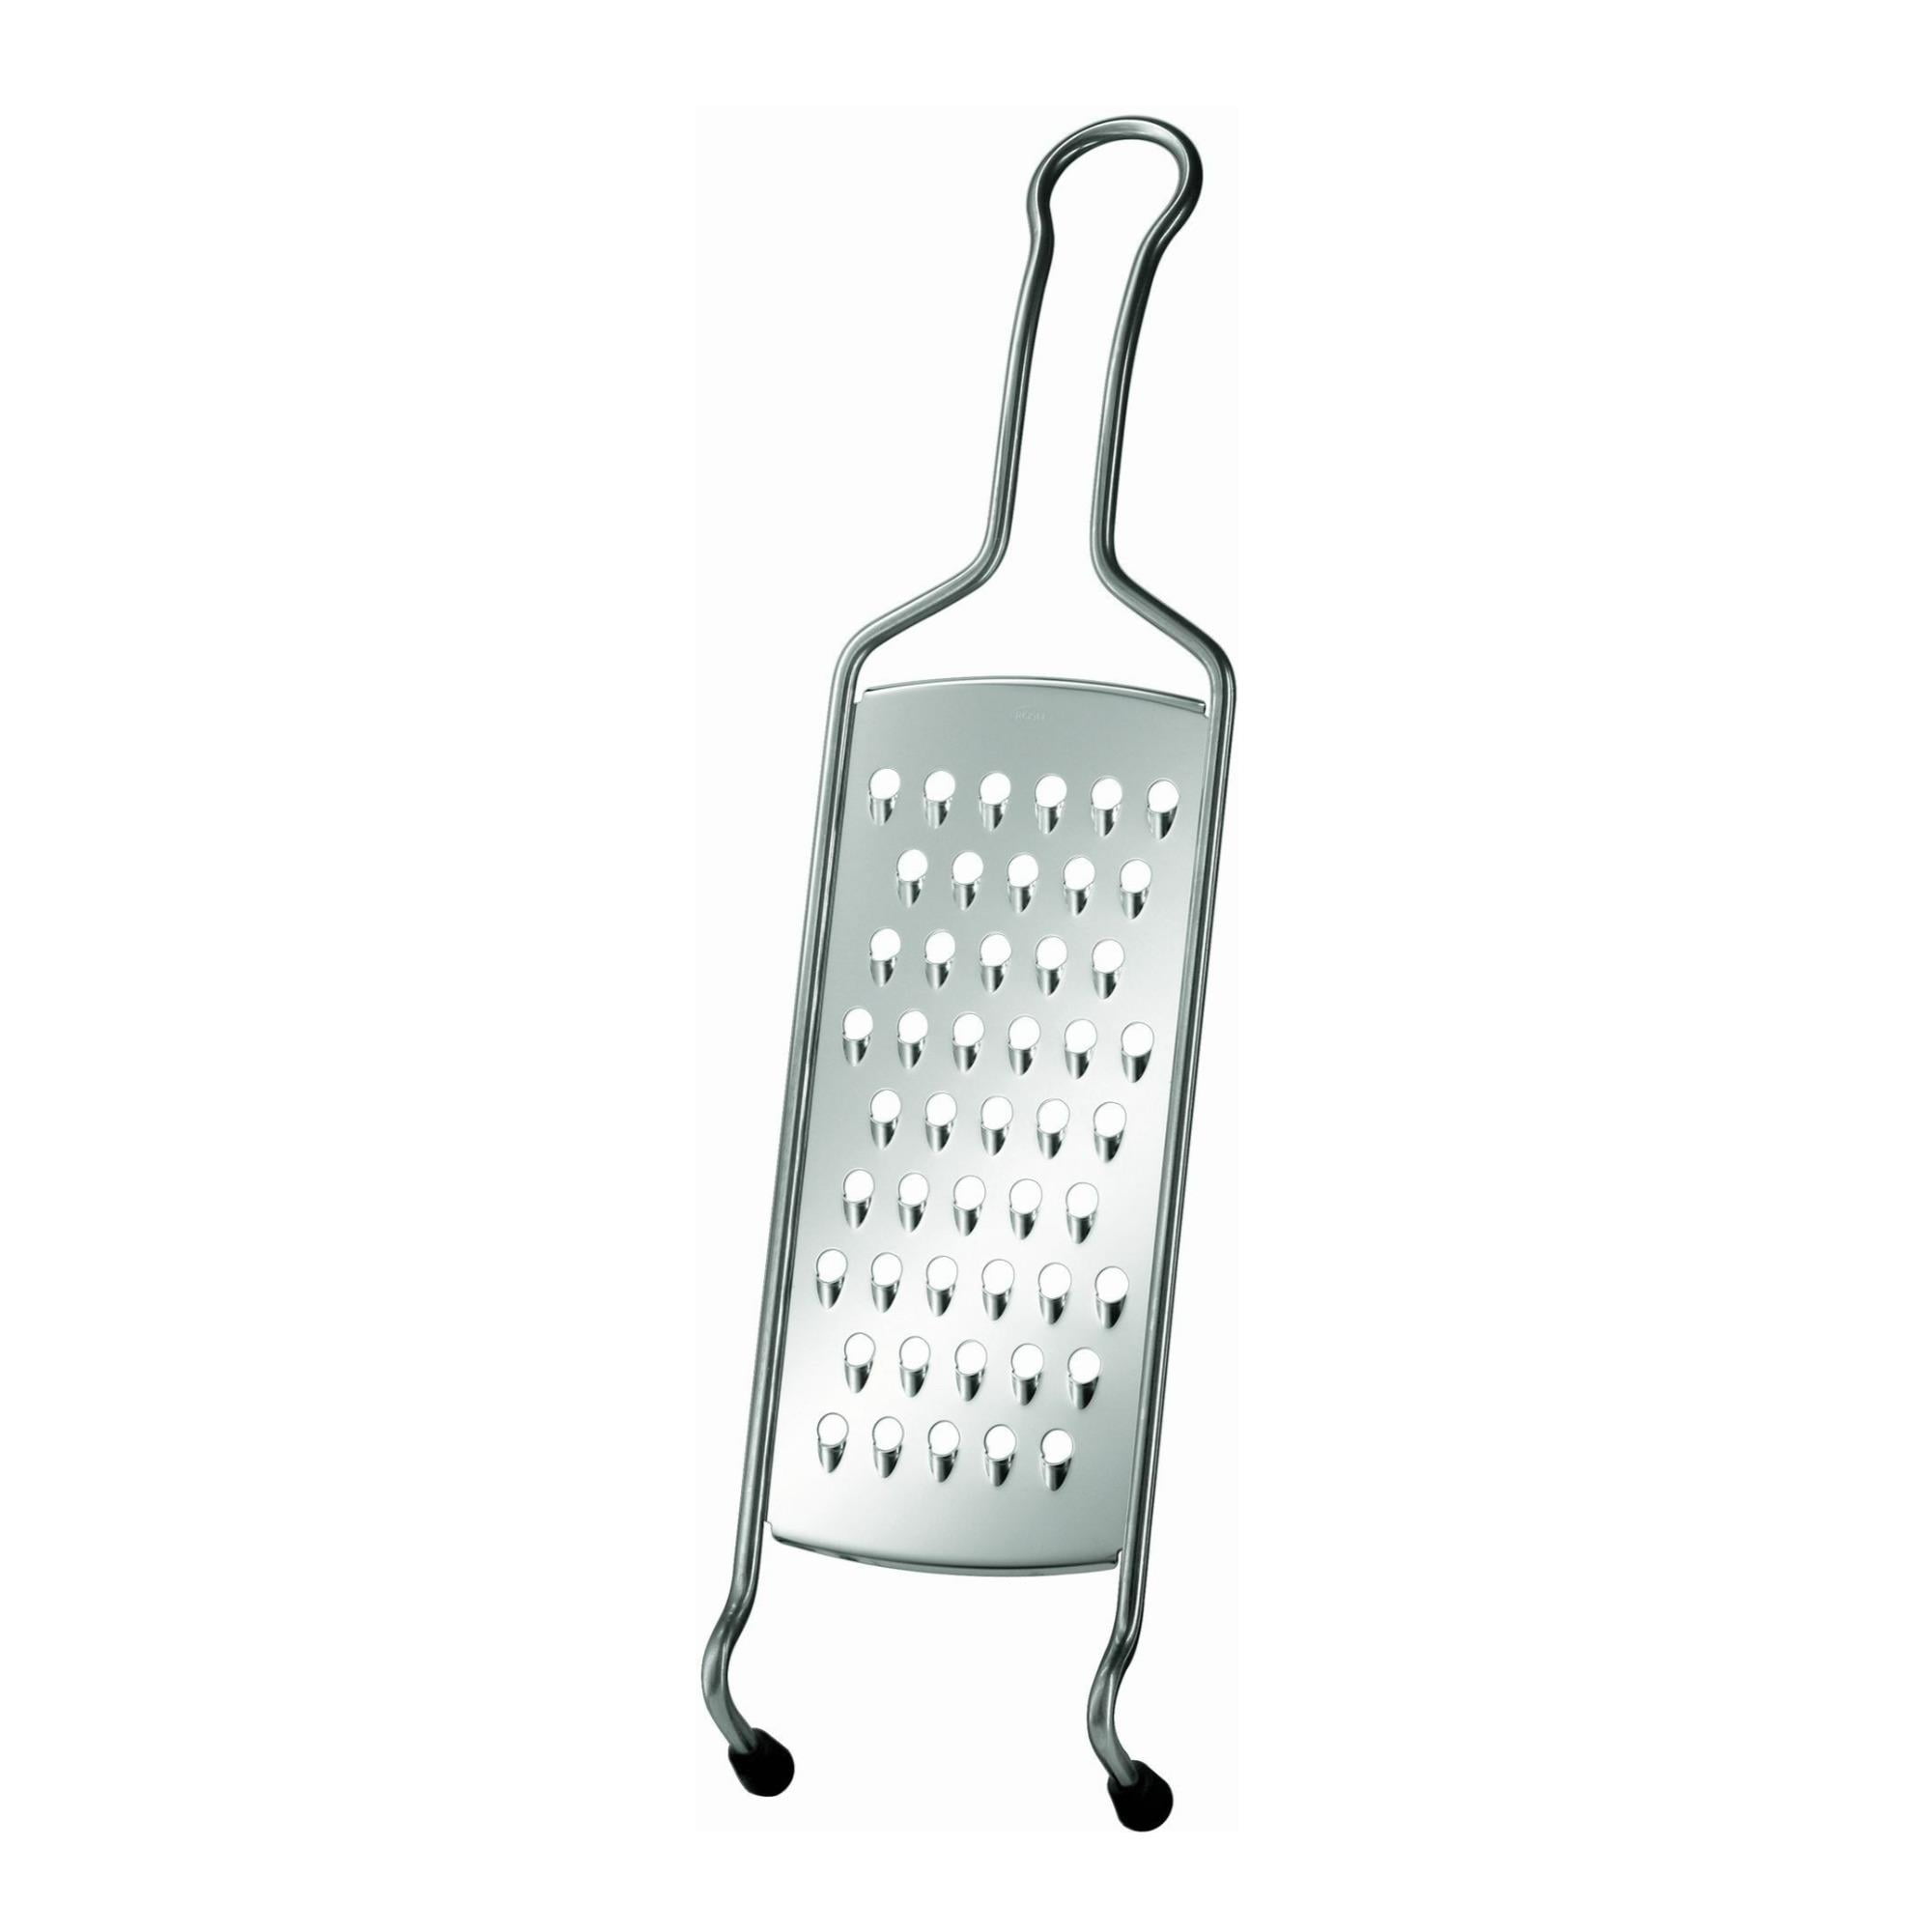 cheese grater foot shaver｜TikTok Search